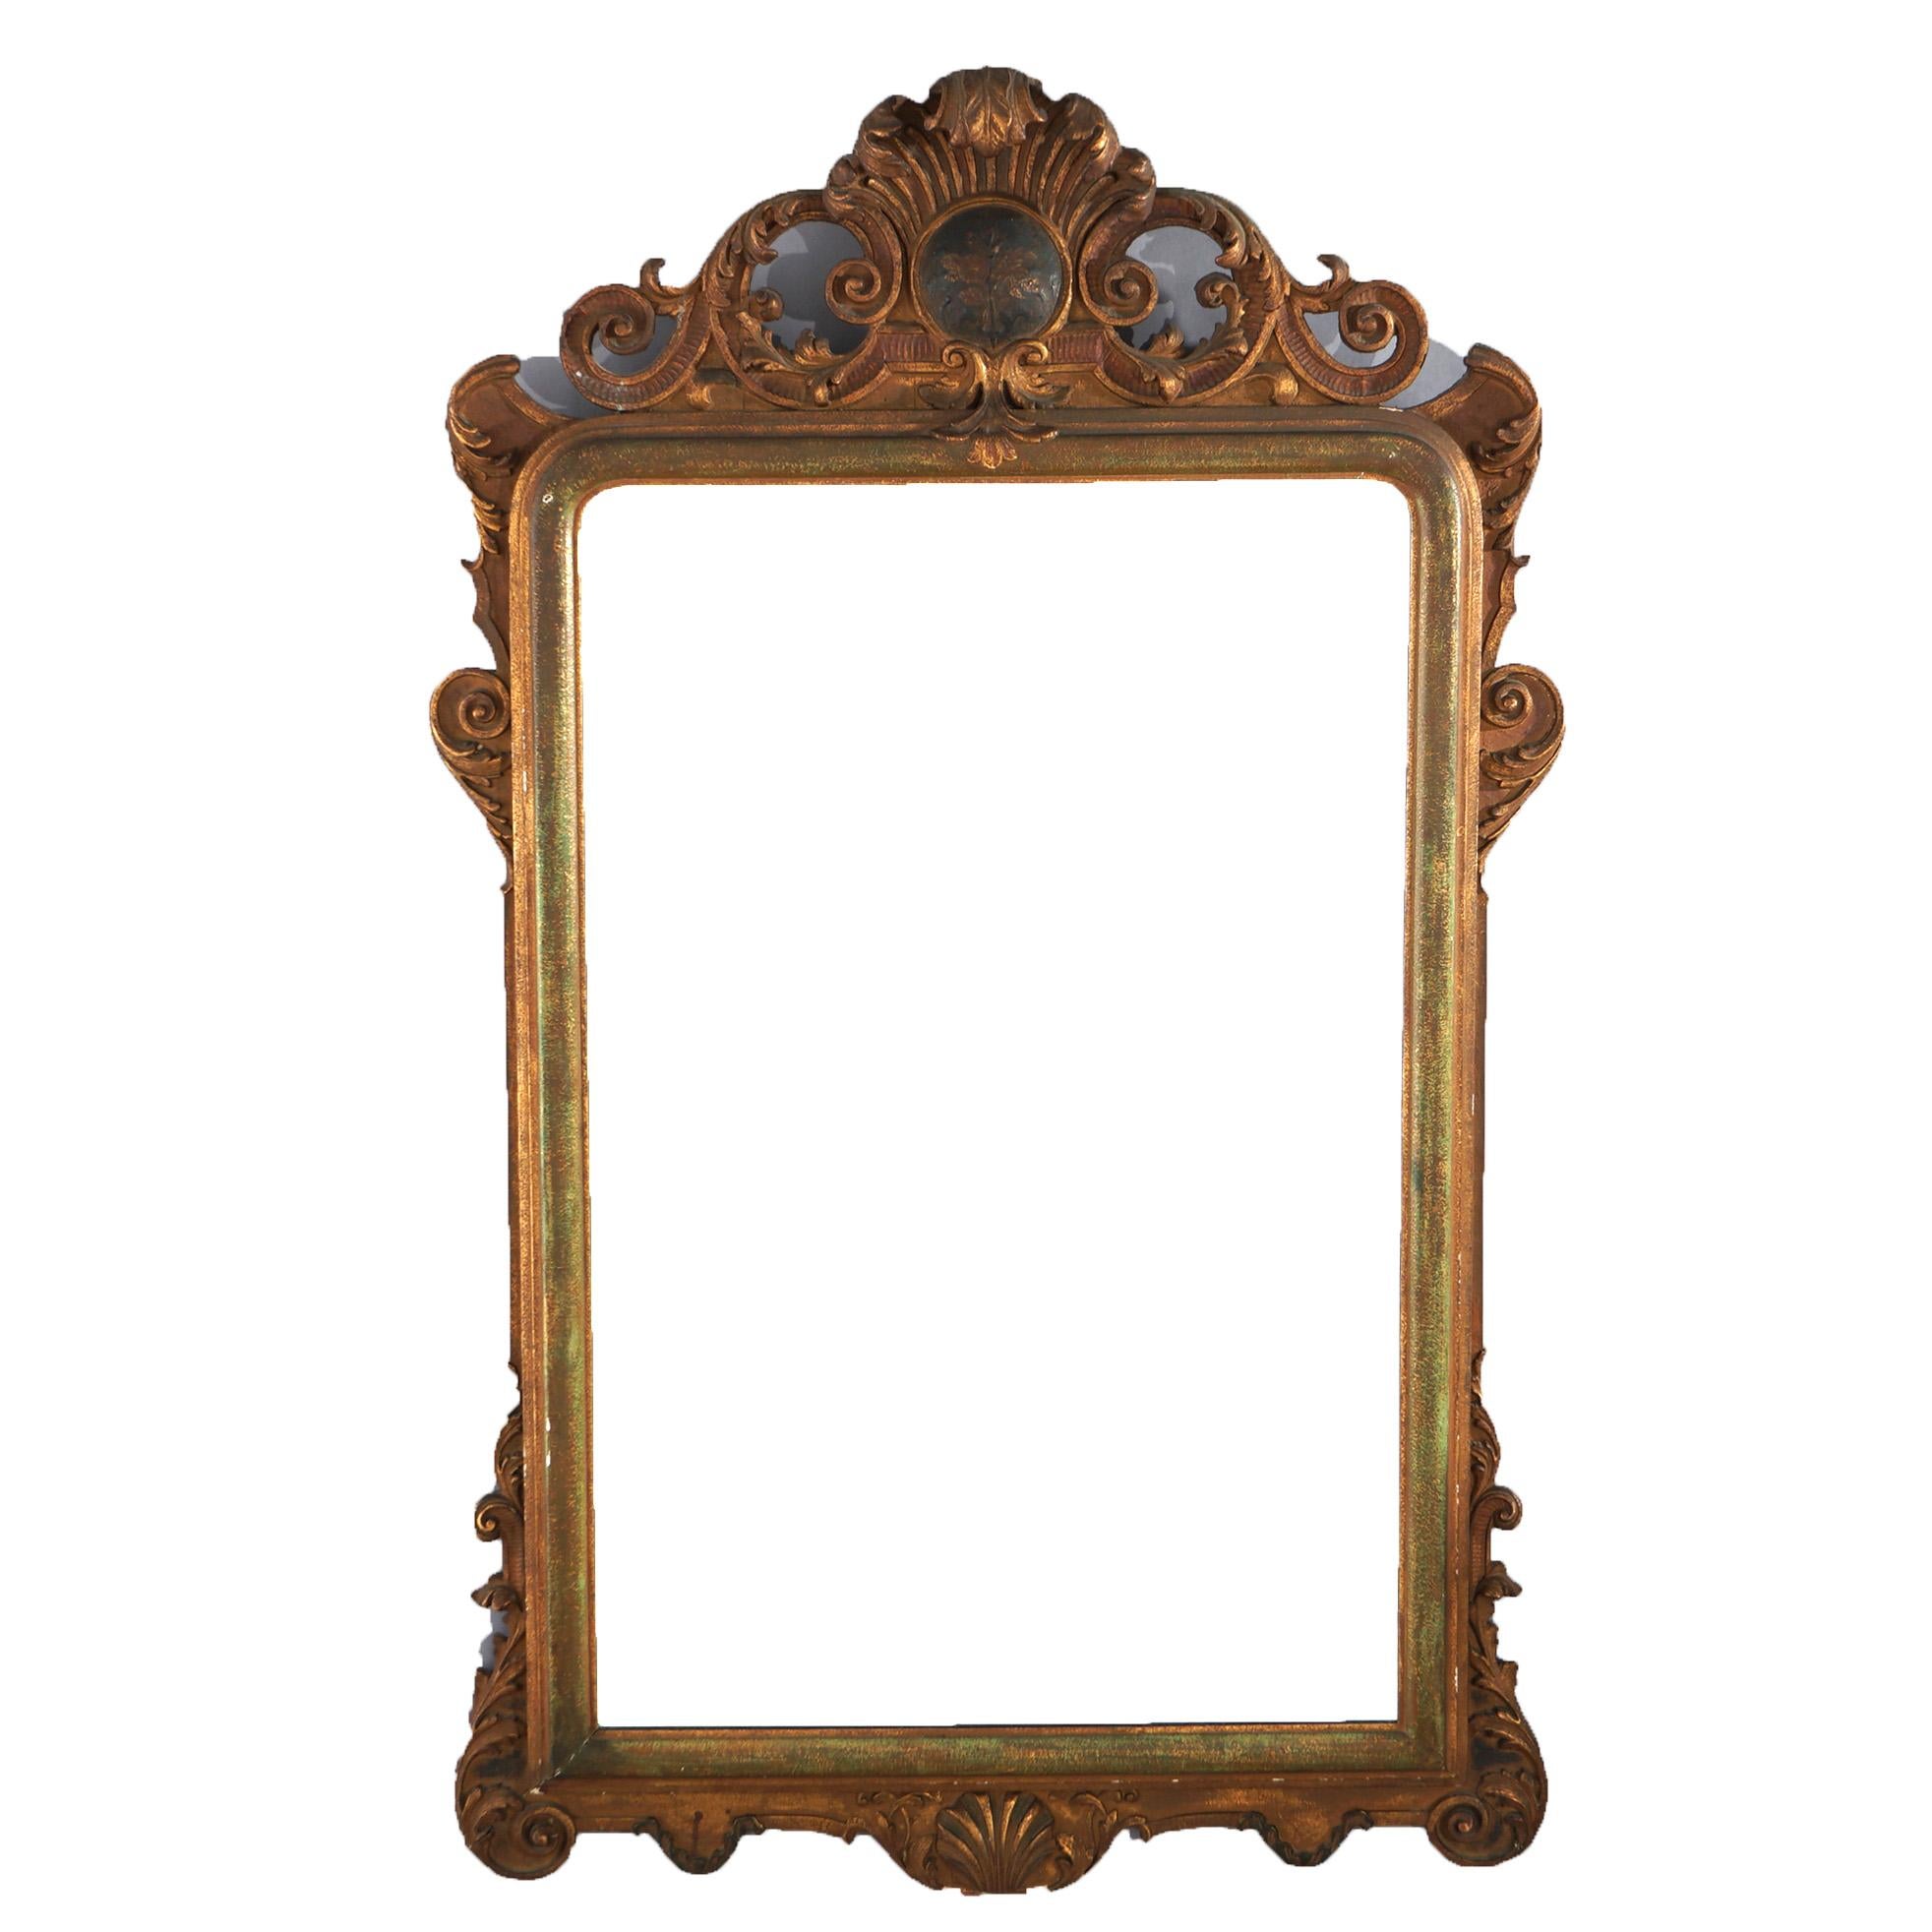 Antique Oversized French Louis XVI Giltwood Mirror with Scroll & Foliate Elements, C1920

Measures- 58.5''H x 35.5''W x 4.25''D; 40.25'' x 26'' sight